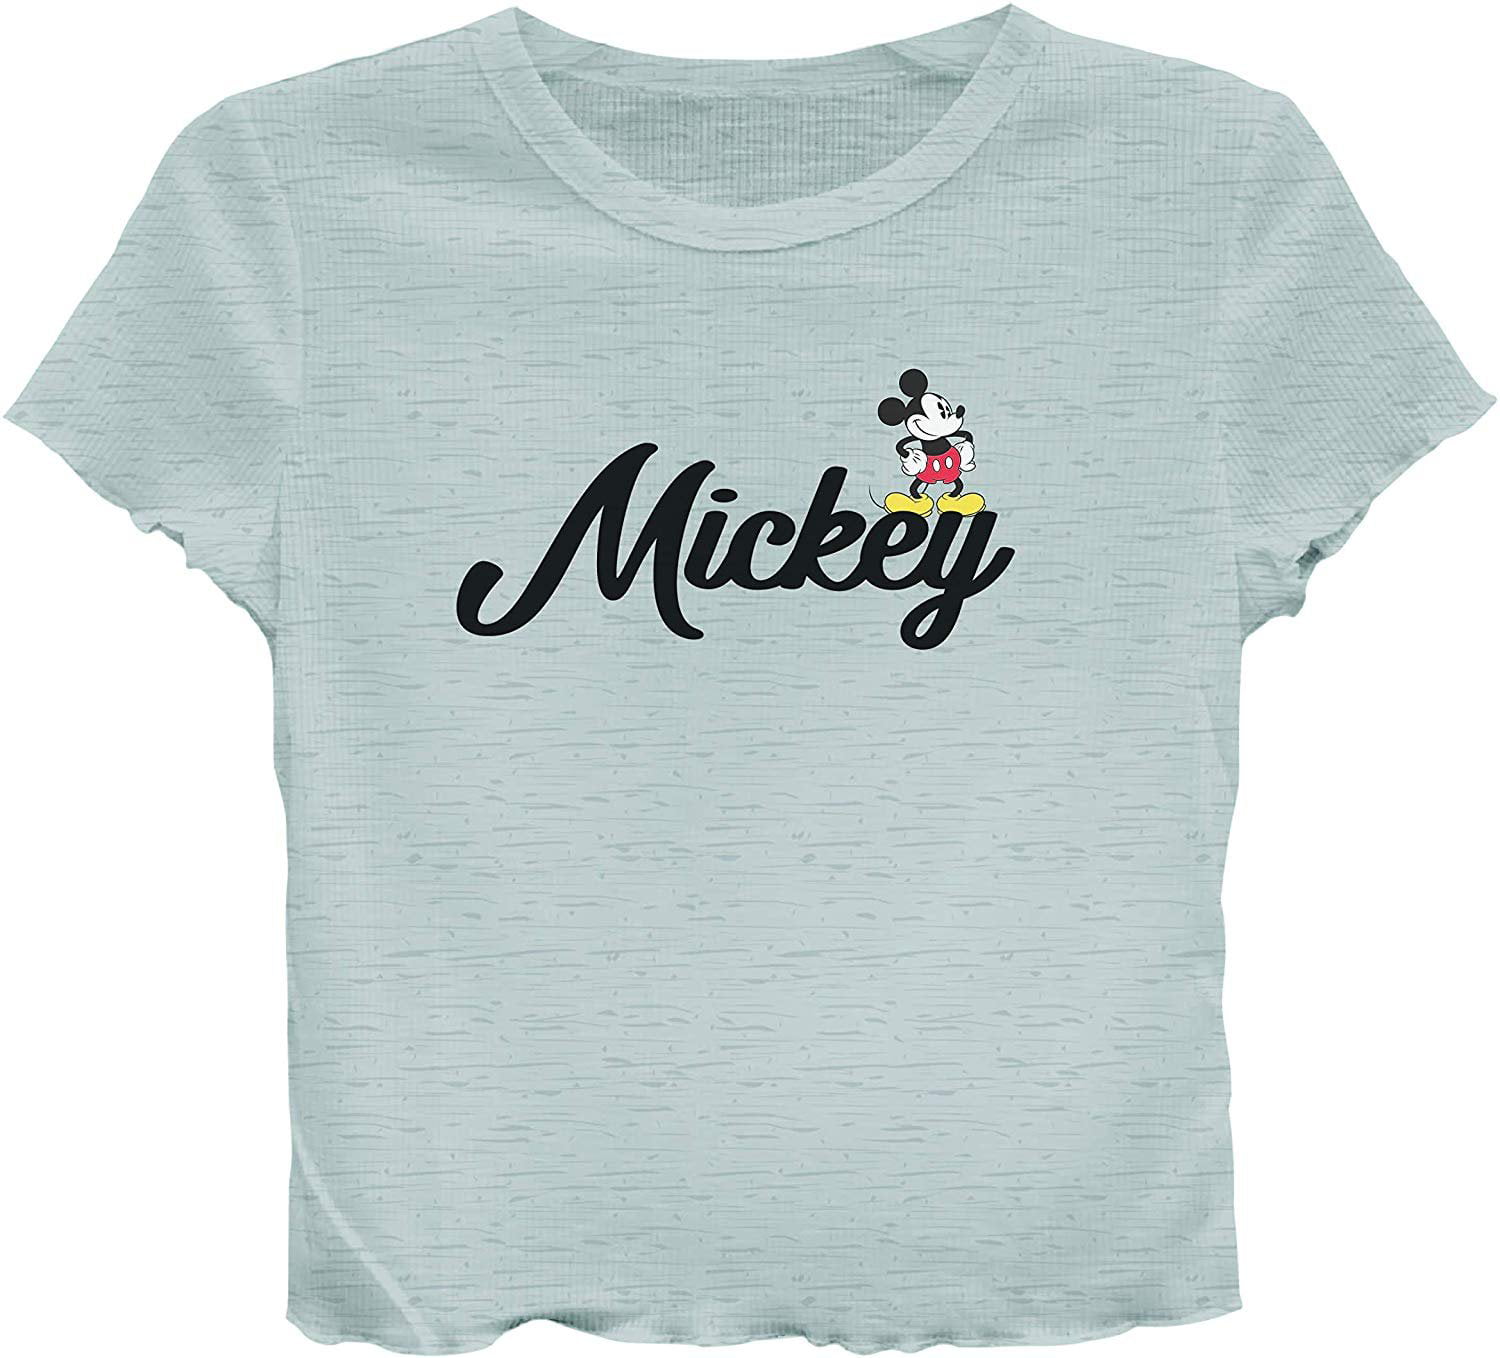 Disney Ladies Mickey Mouse Fashion Shirt - Ladies Classic Mickey Mouse ...